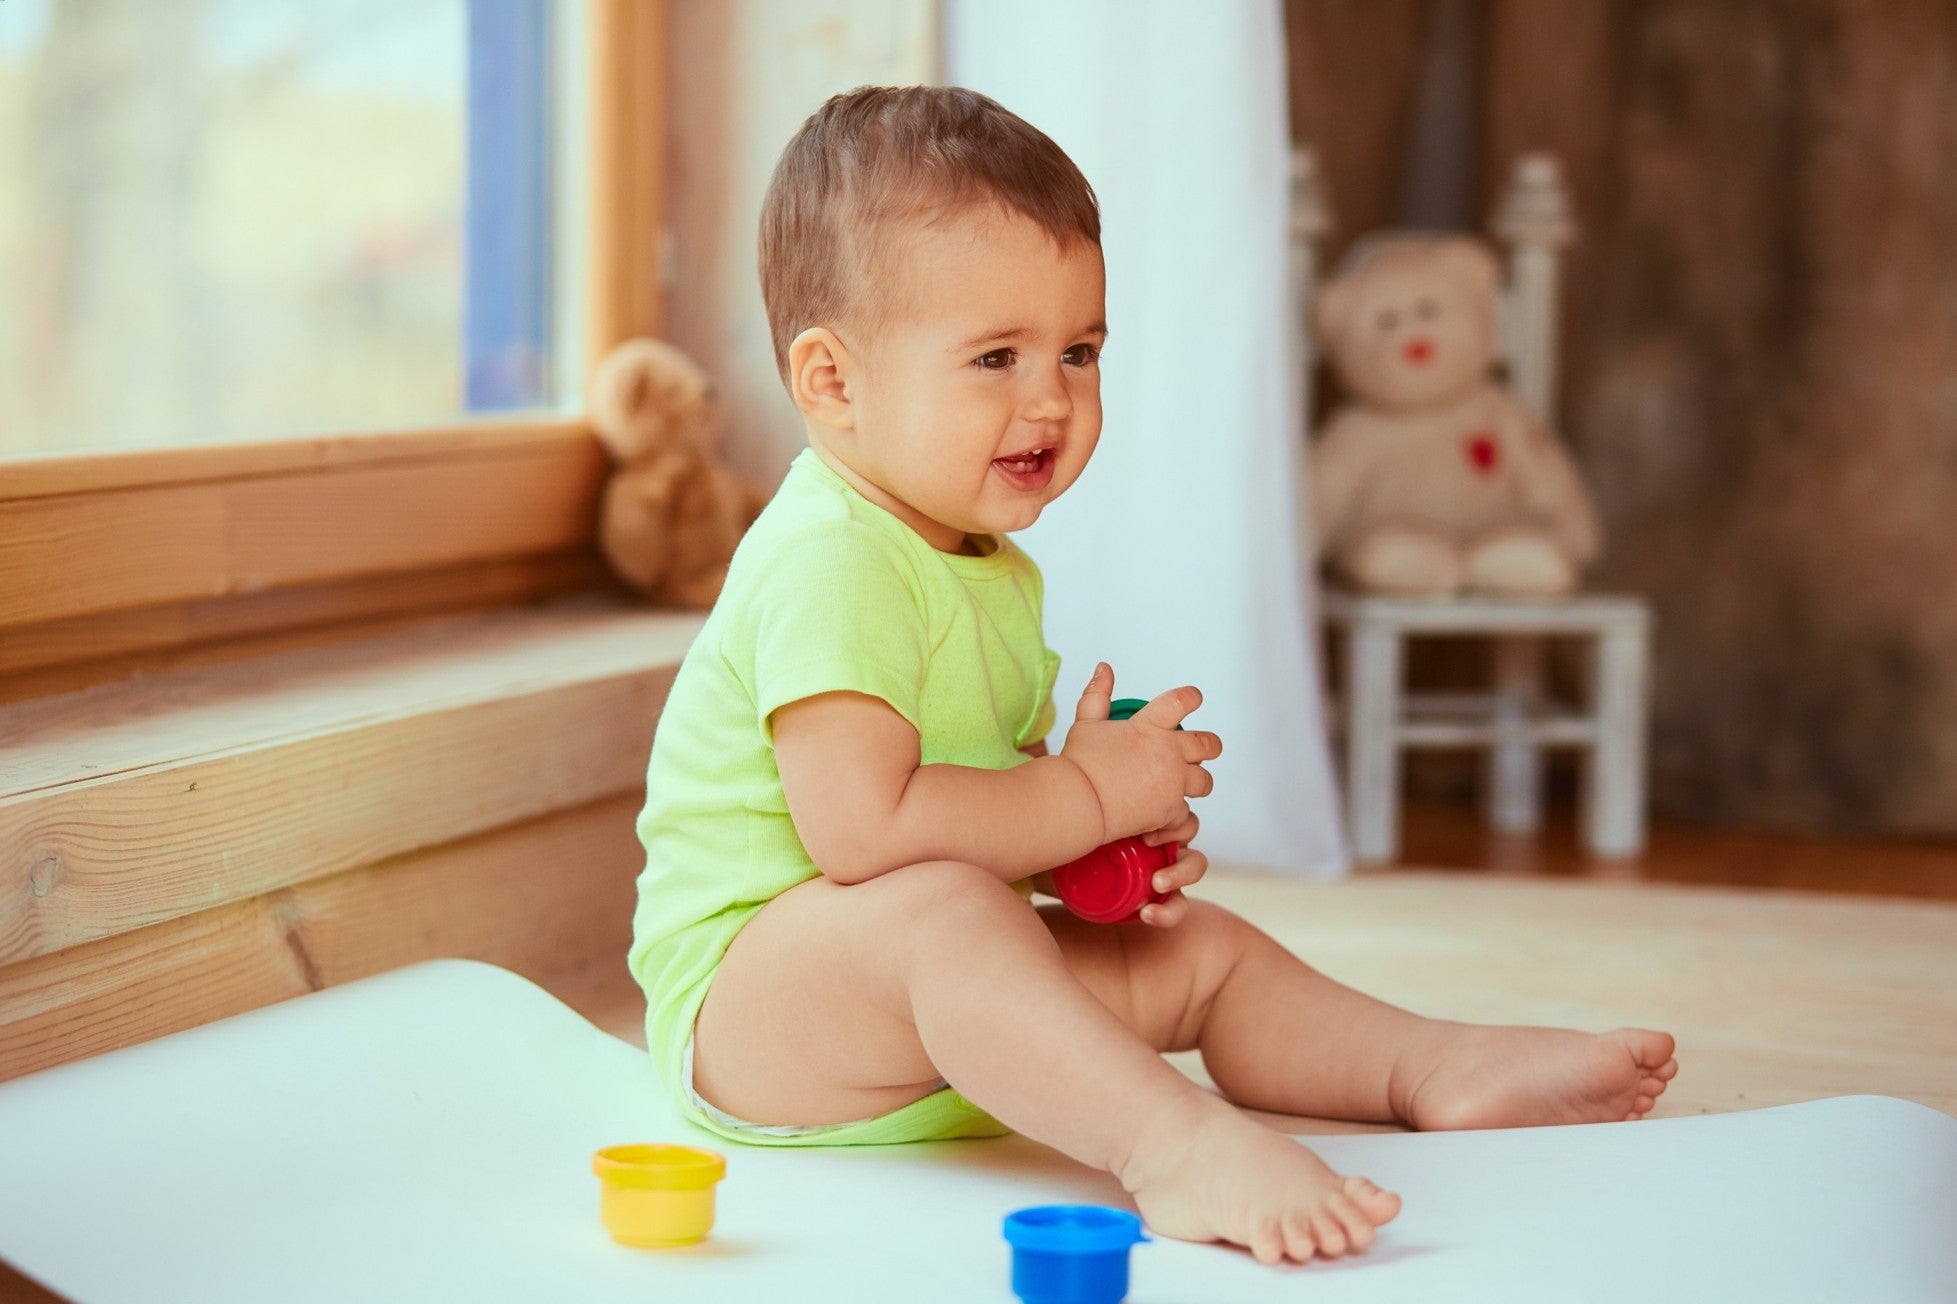 Potty training: 10 tips for success